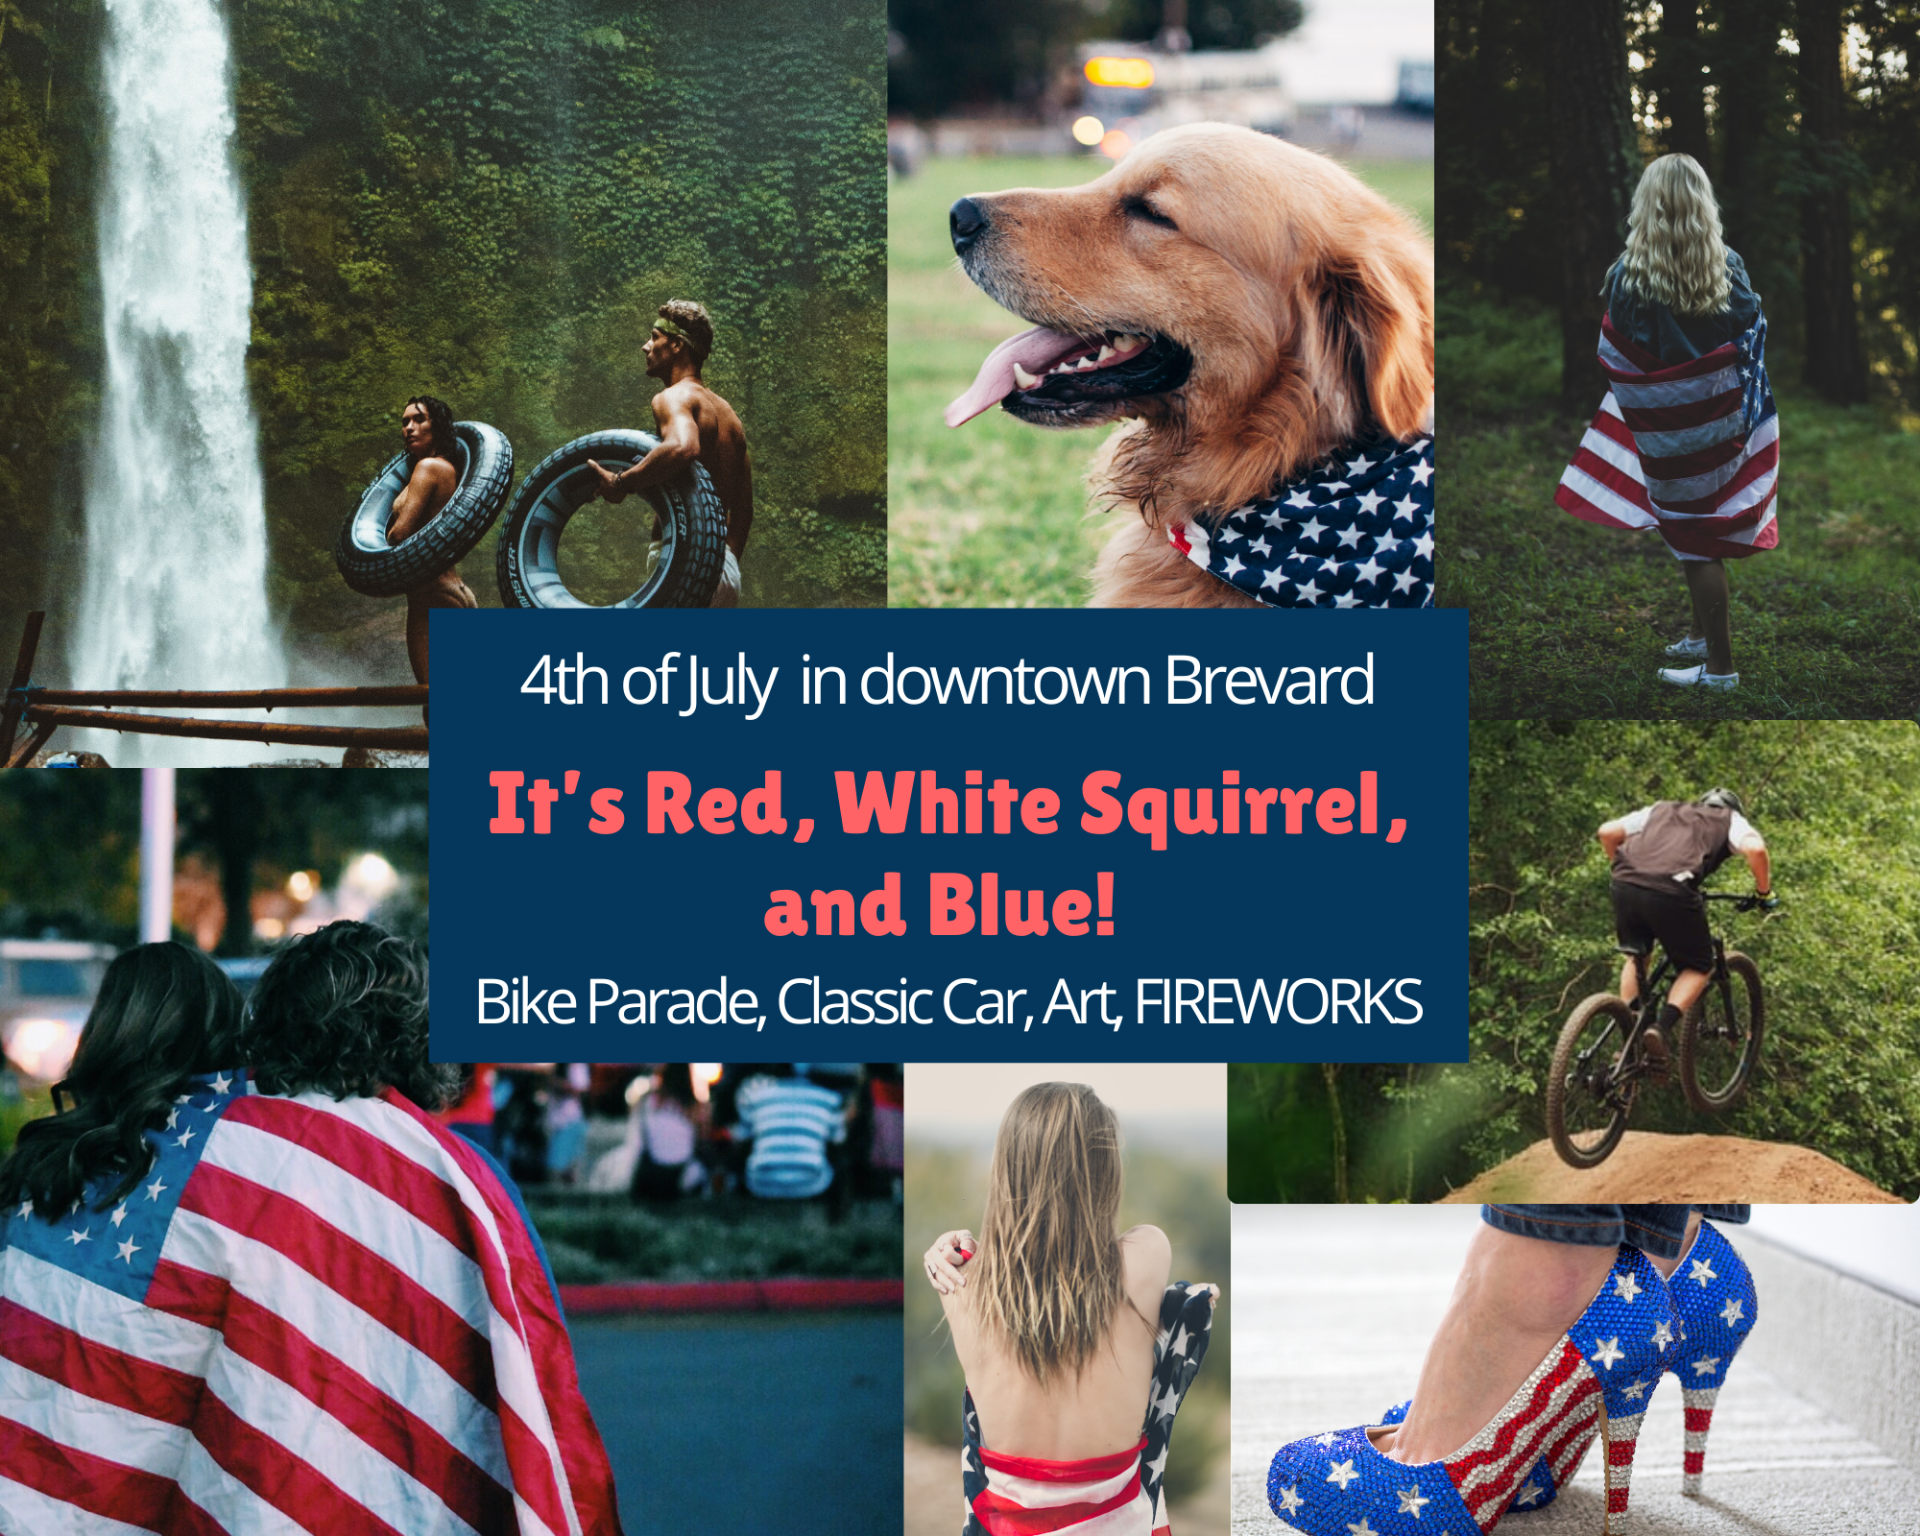 fourth of july in downtown brevard it 's red white squirrel and blue !